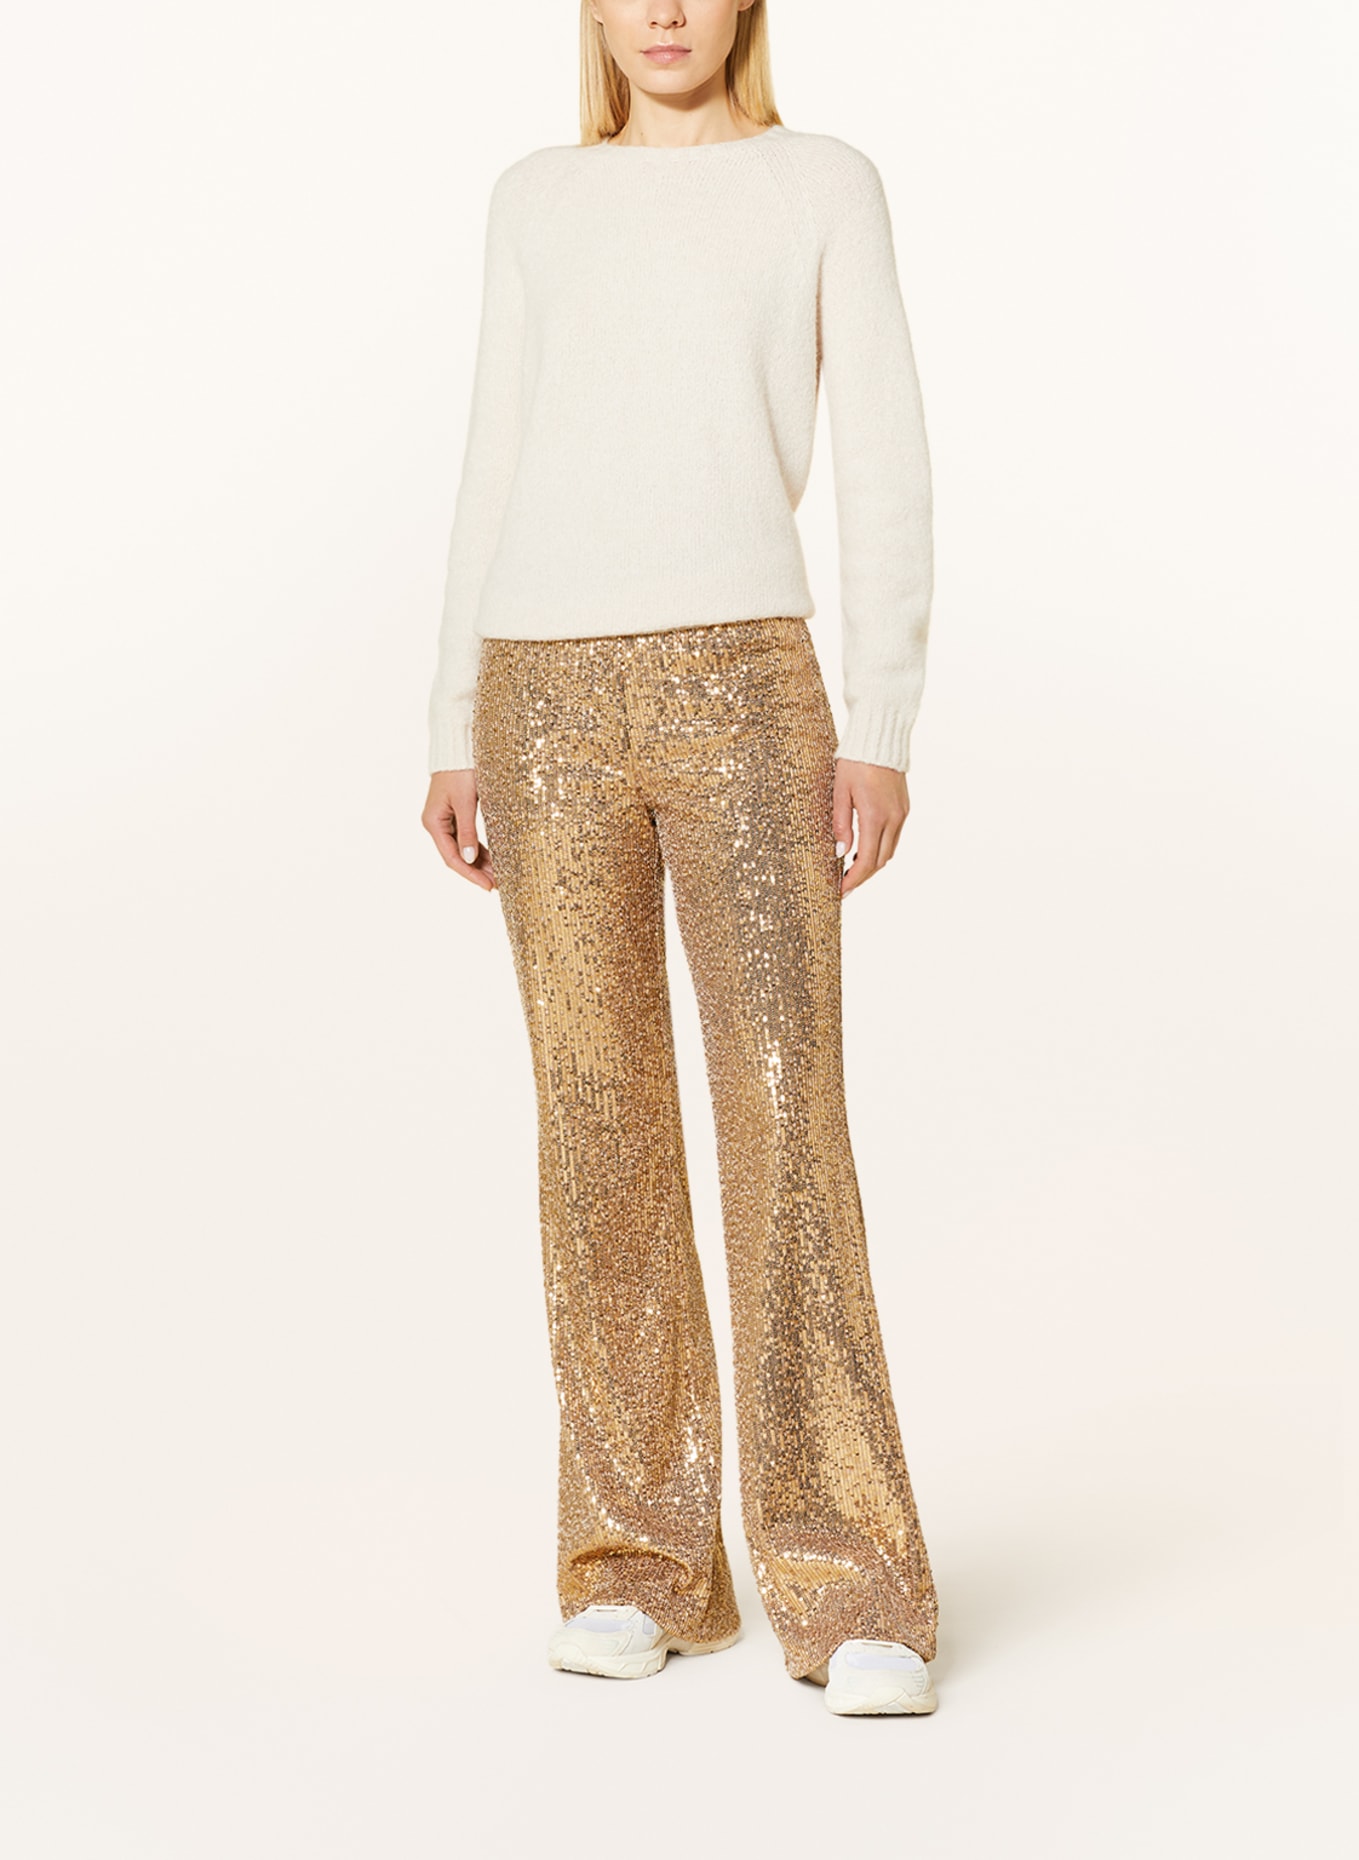 CAMBIO Hose FRANCIS mit Pailletten in gold